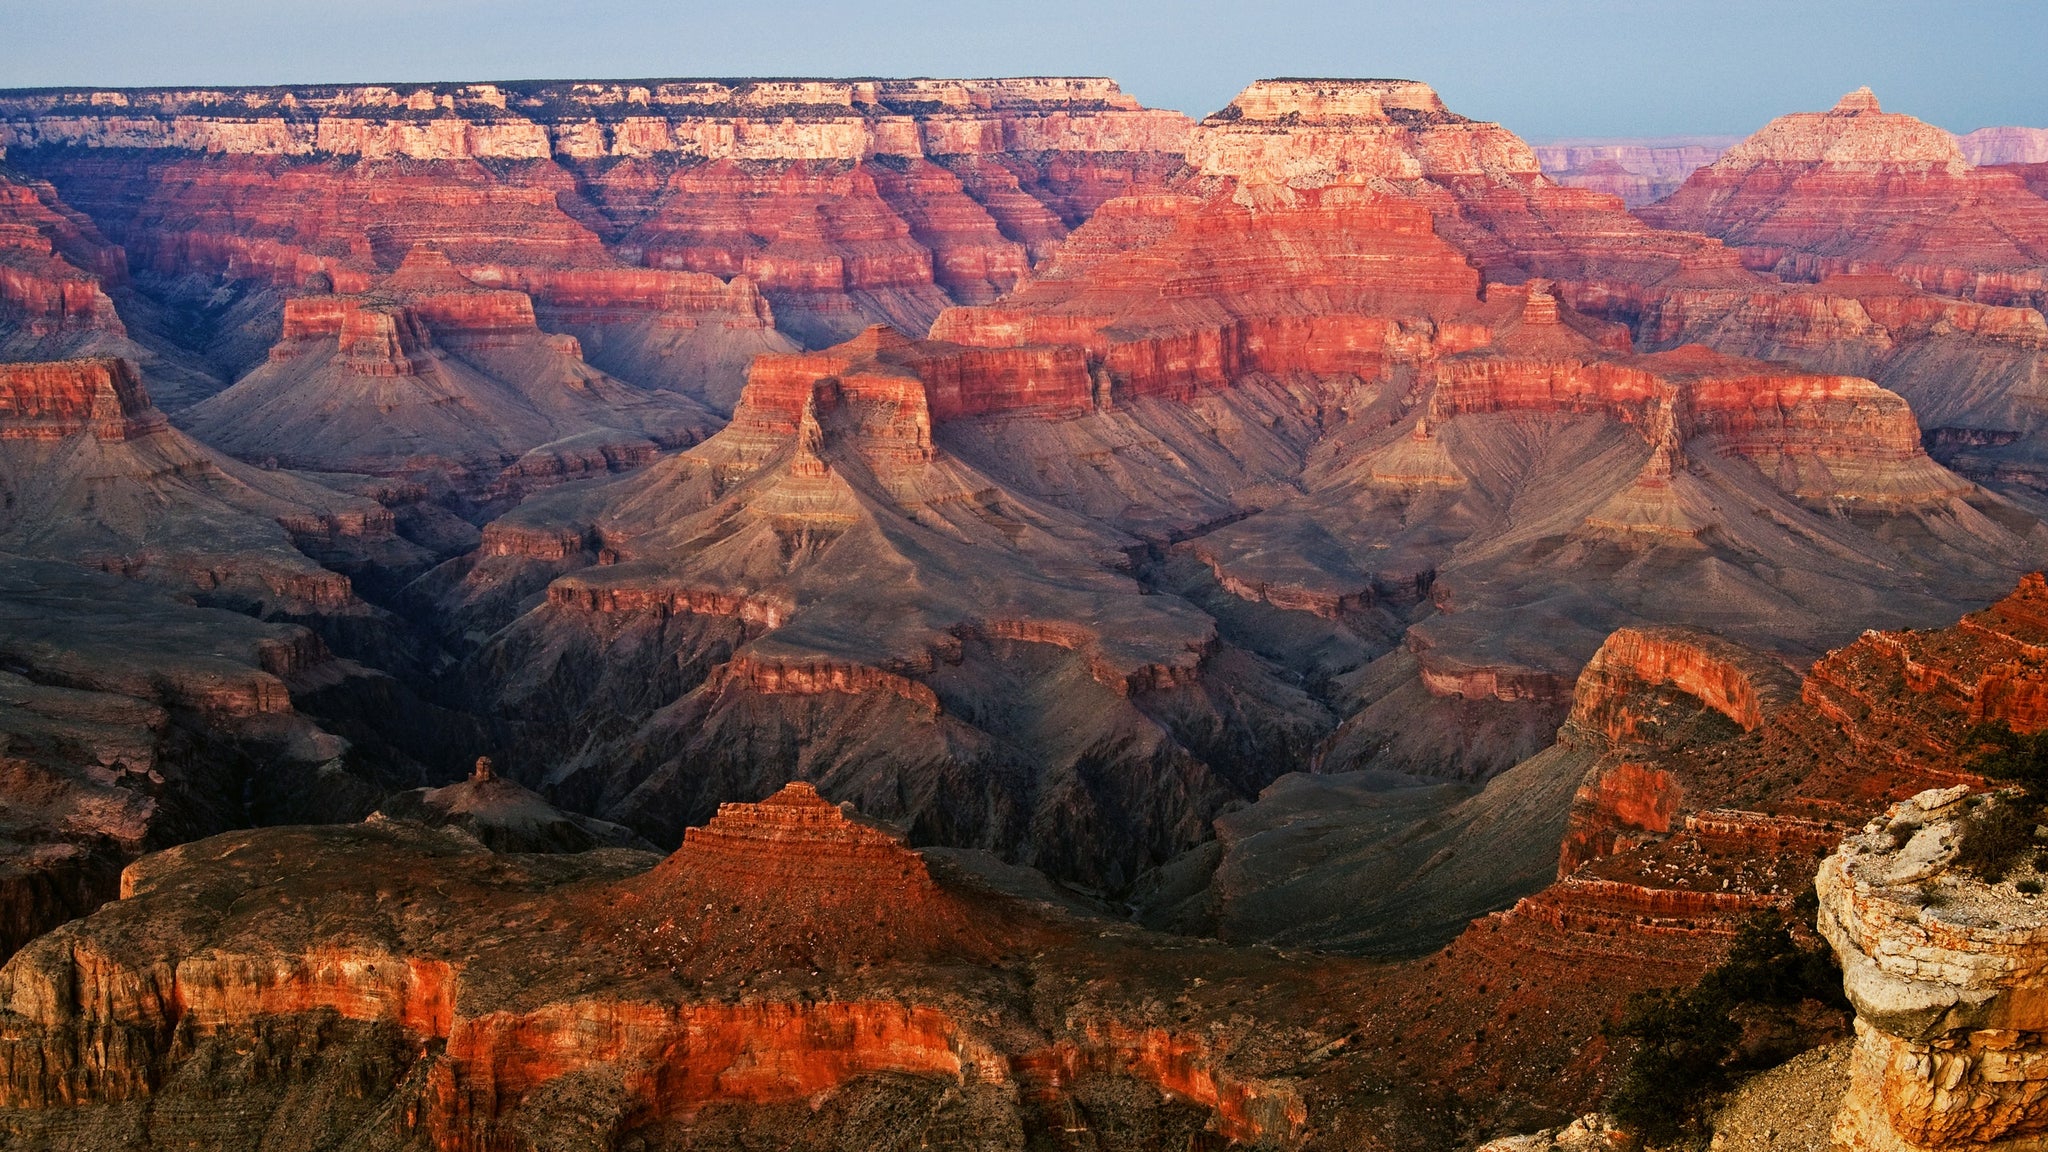 Top 3 things to do in the Grand Canyon